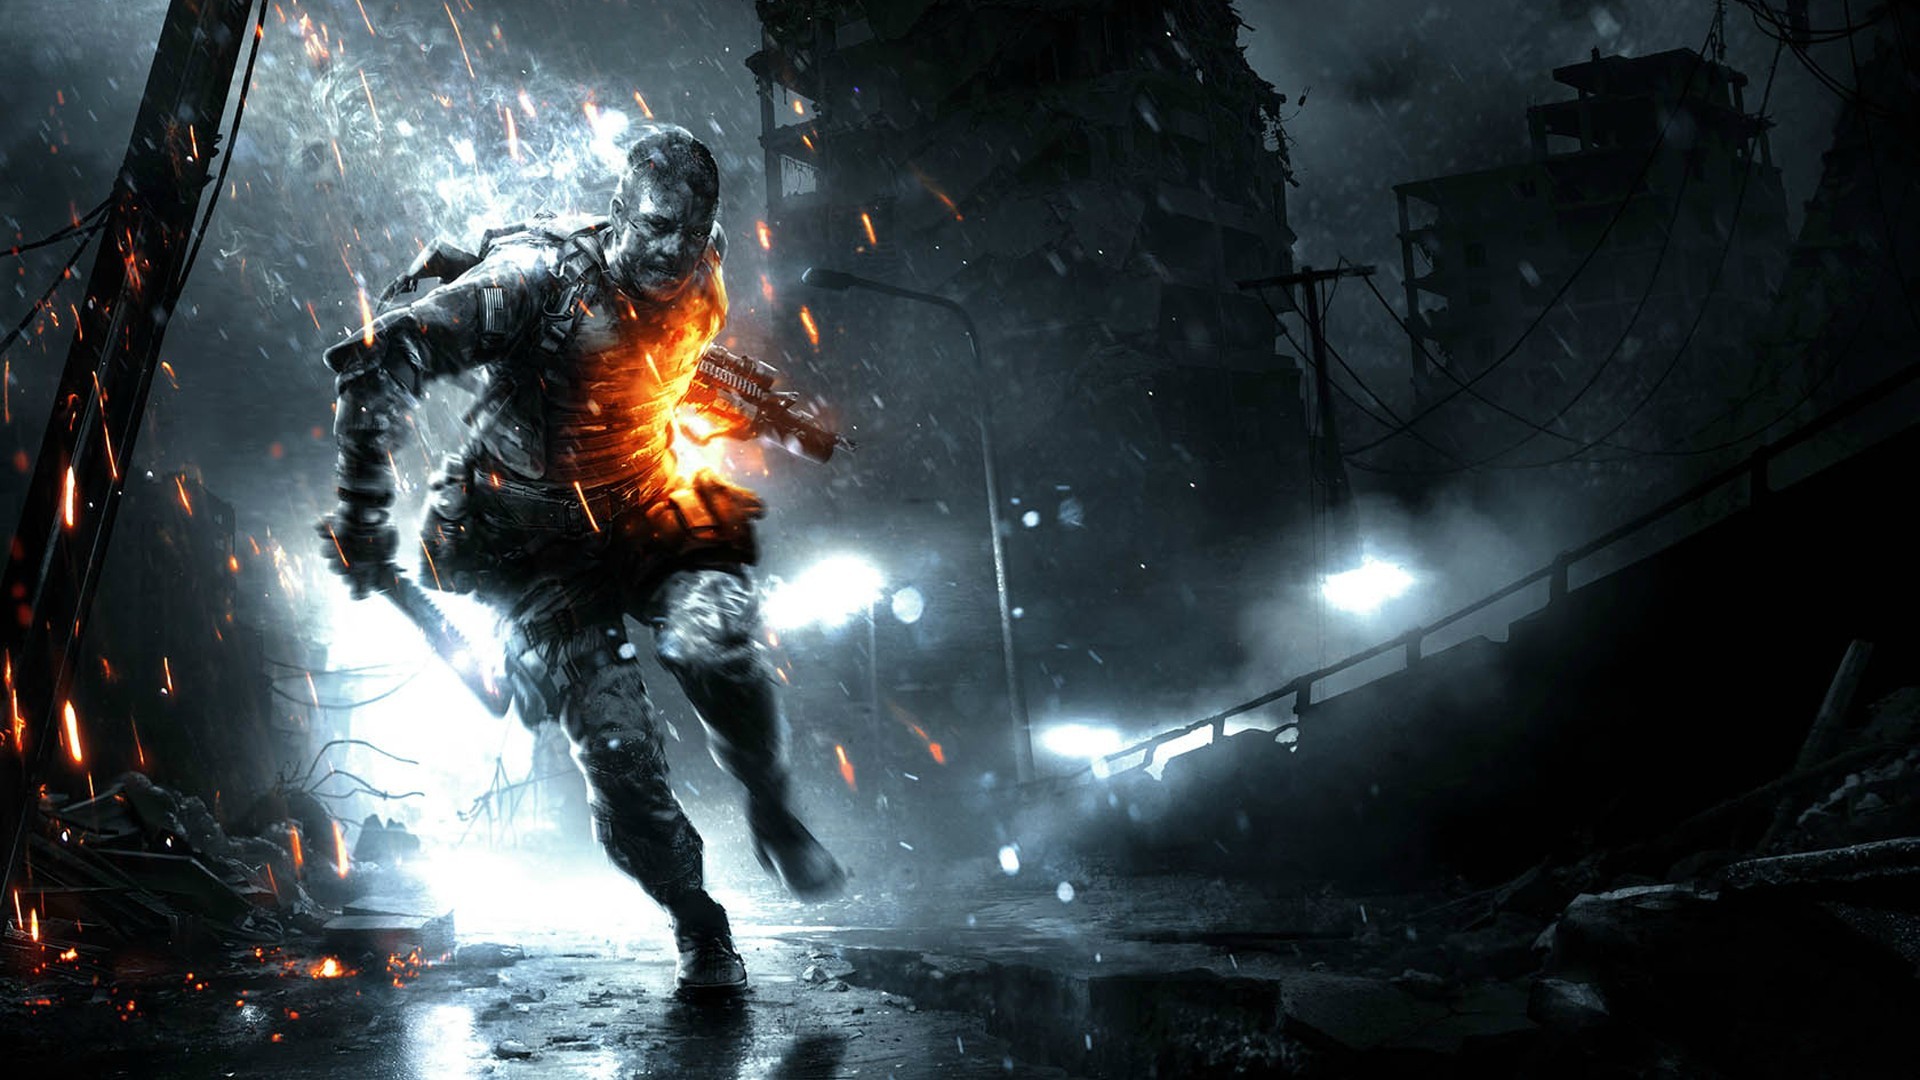 hd game wallpapers 1080p widescreen